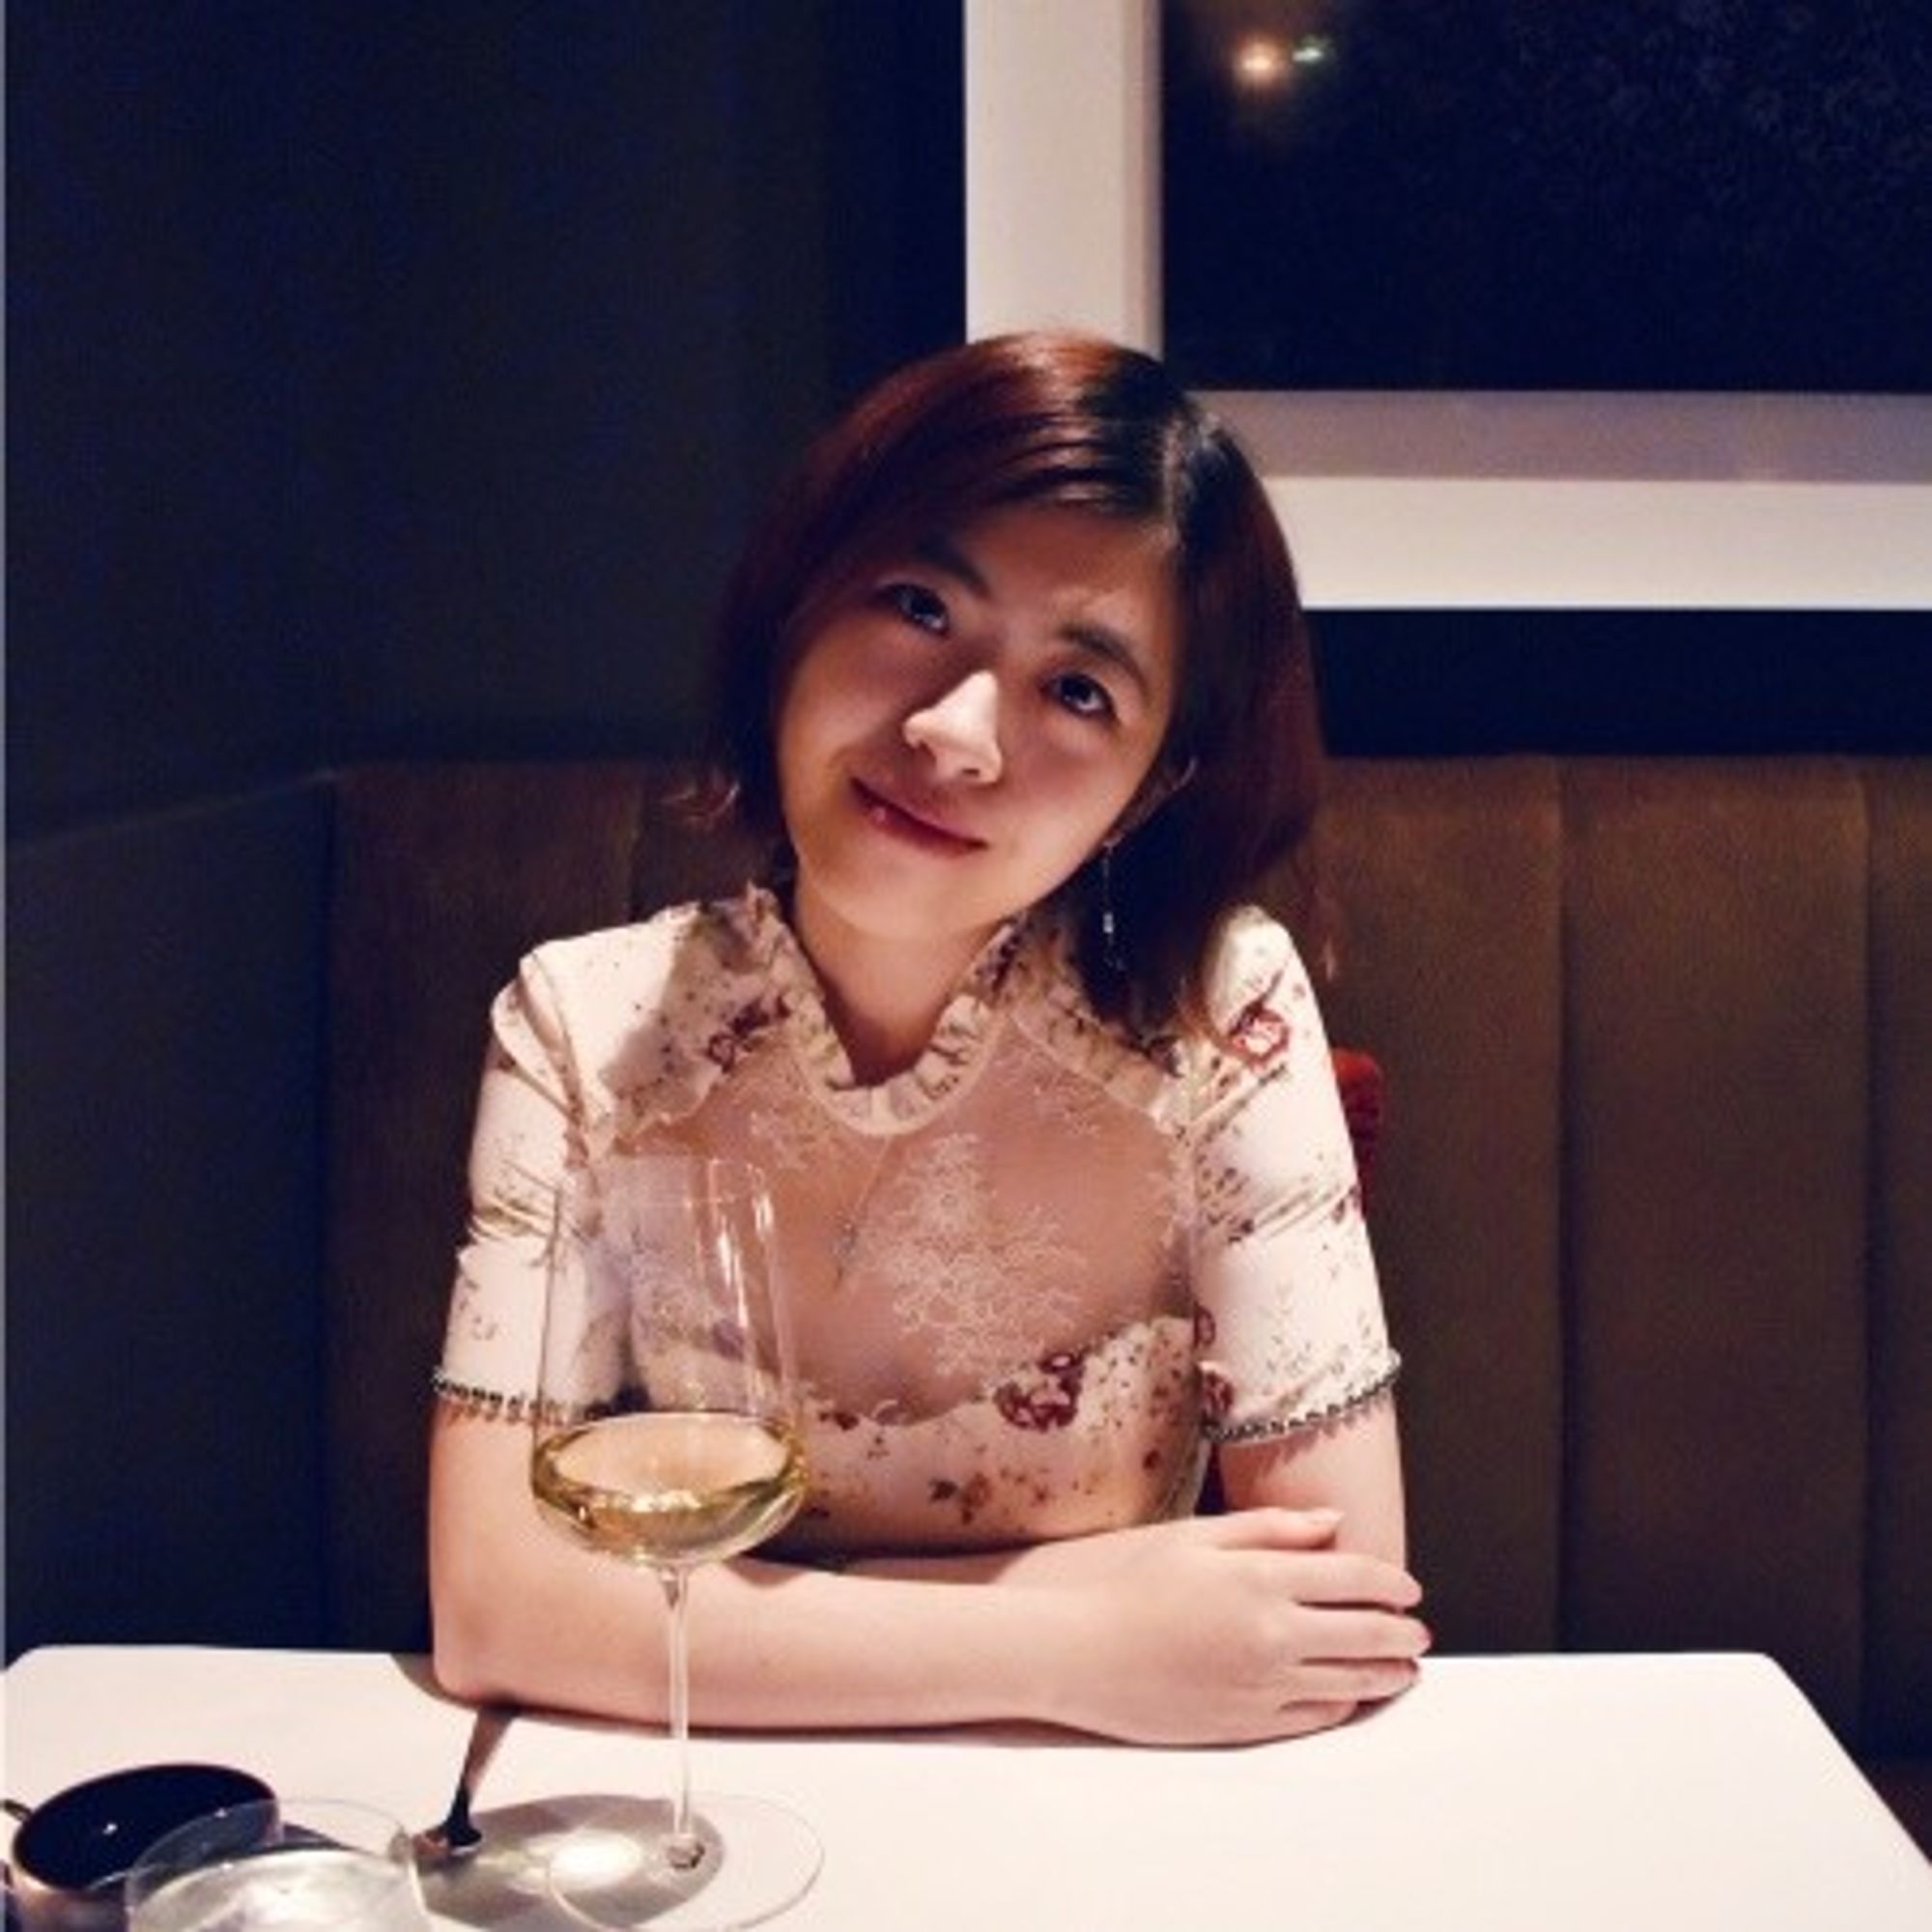 Rachel Peng
Software Engineer
Prior Software Engineer @Airbnb • Loves photography and anything related to Rilakkuma